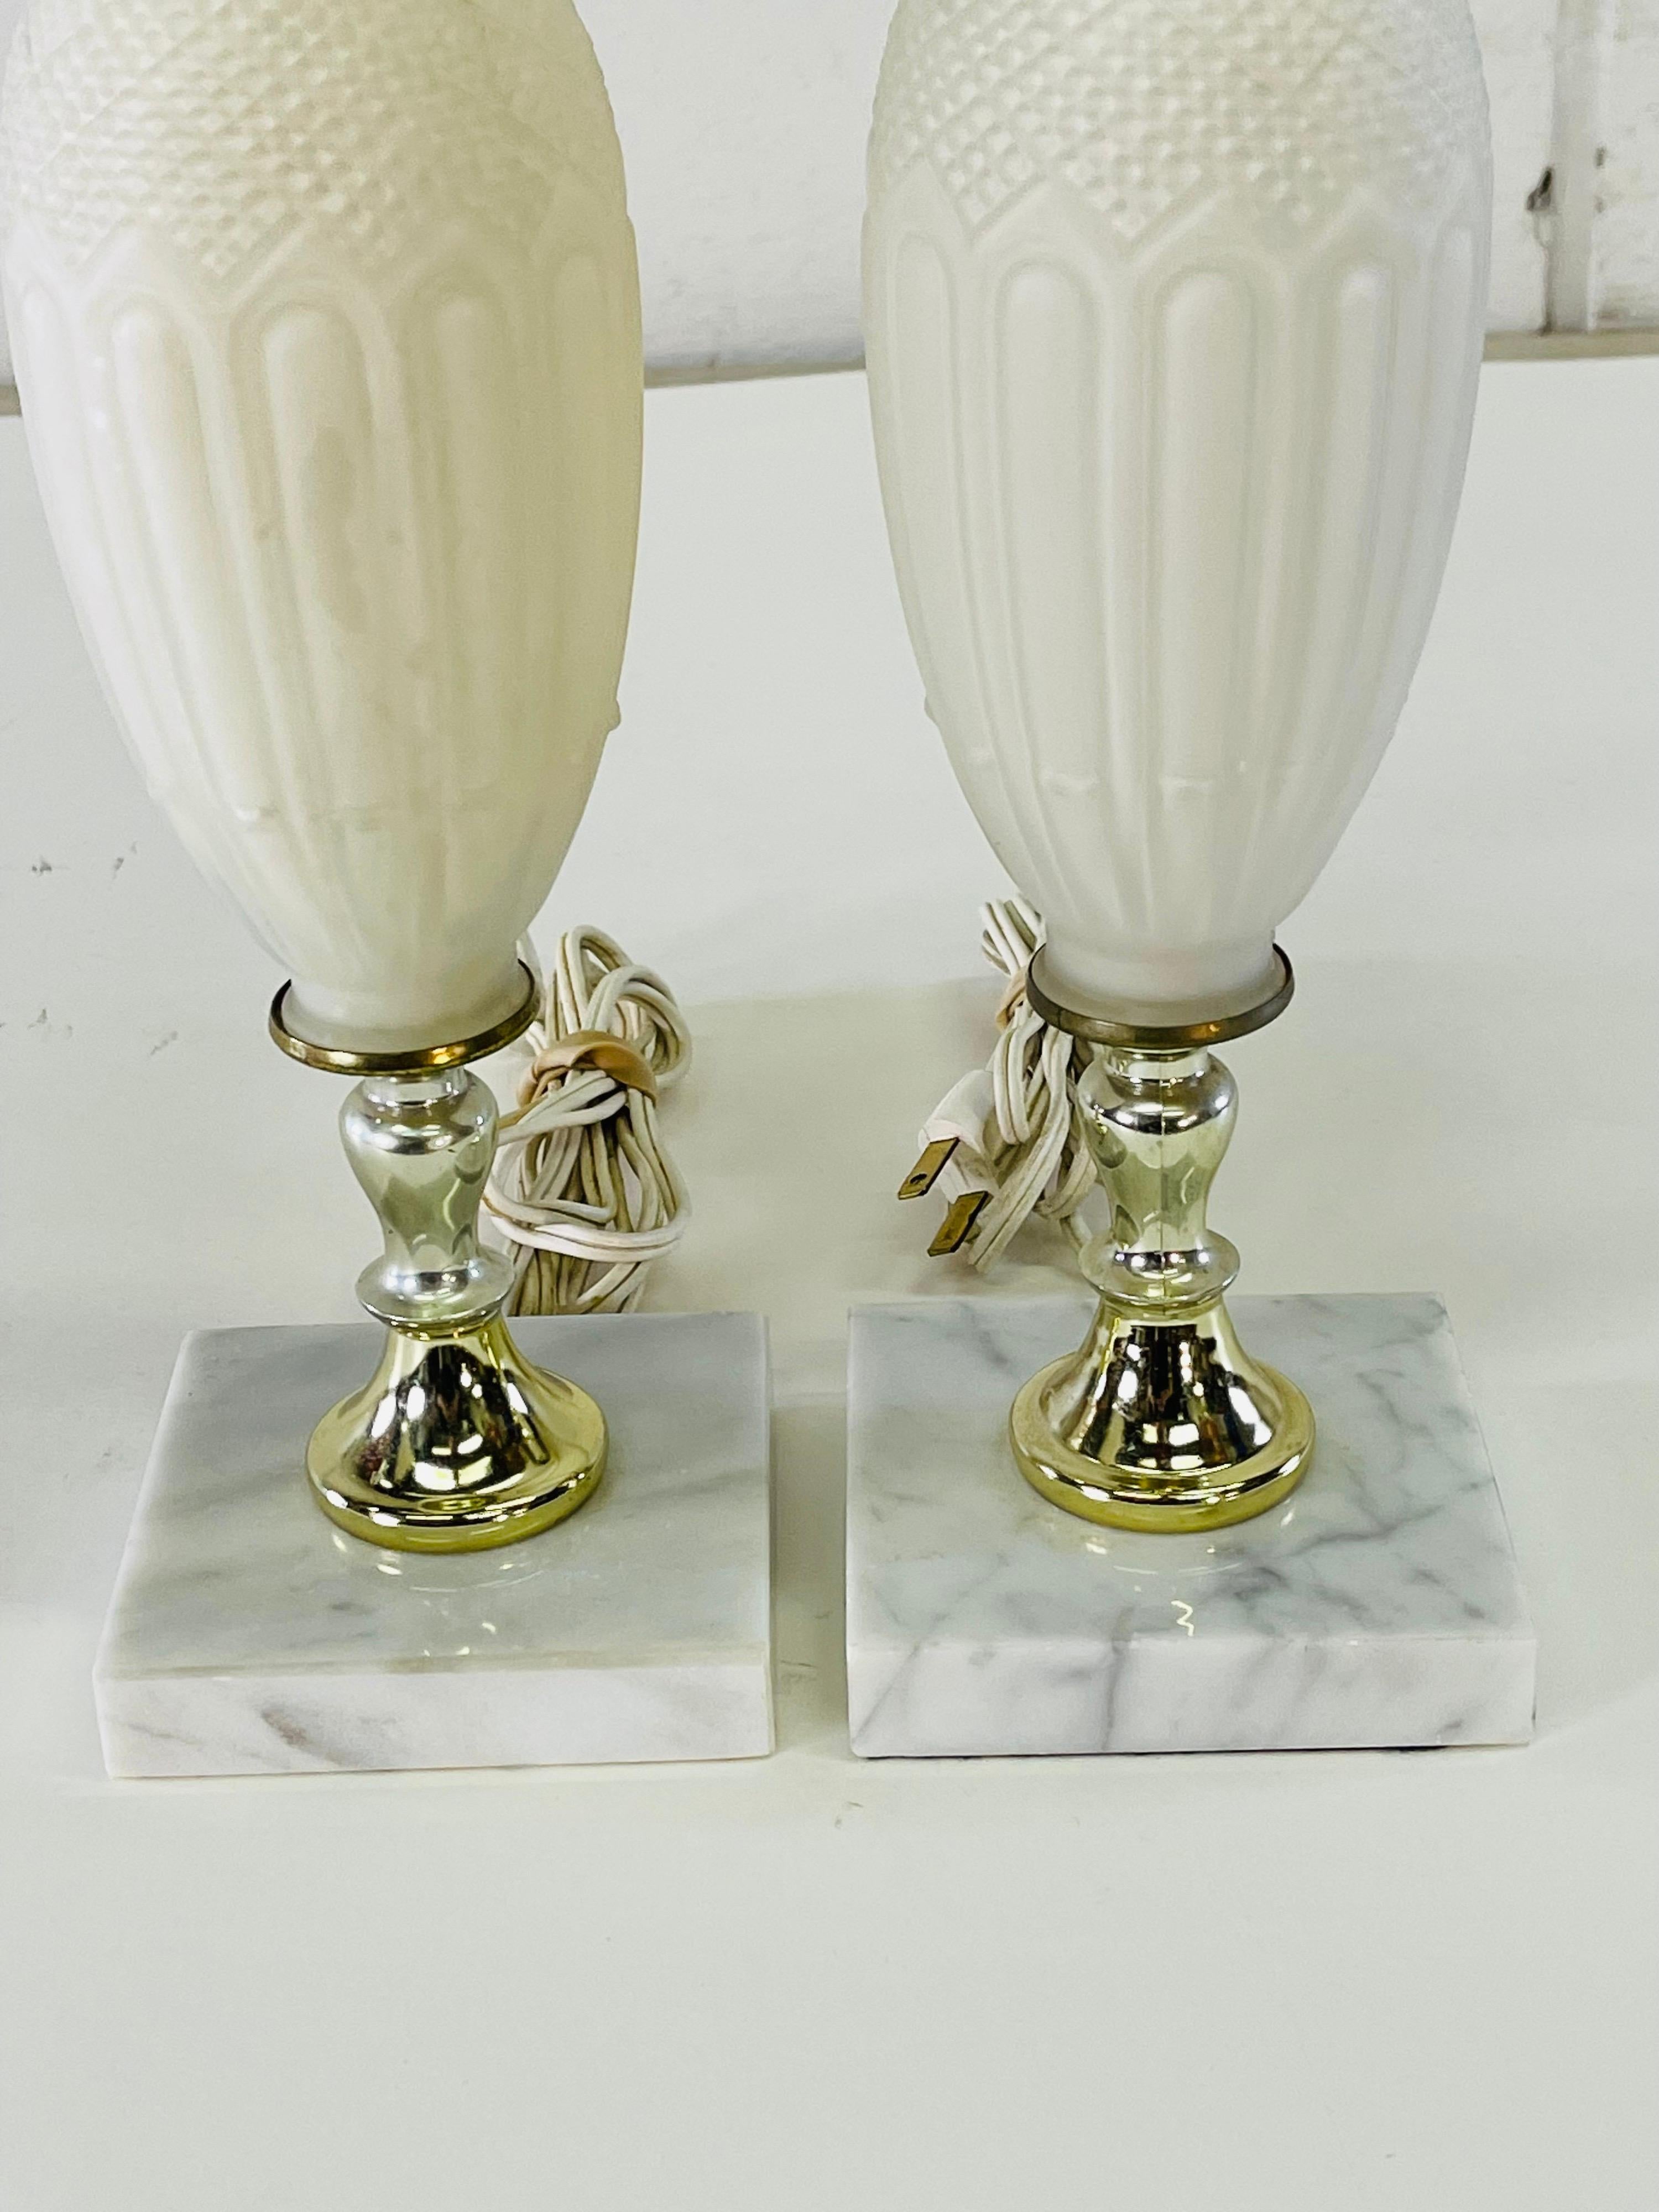 Vintage 1960s pair of frosted white glass table lamps with square marble bases. Wired for the US and in working condition. Socket, 18.5”H. Harp, 4” diameter x 9” height. Finials are plastic. No marks.